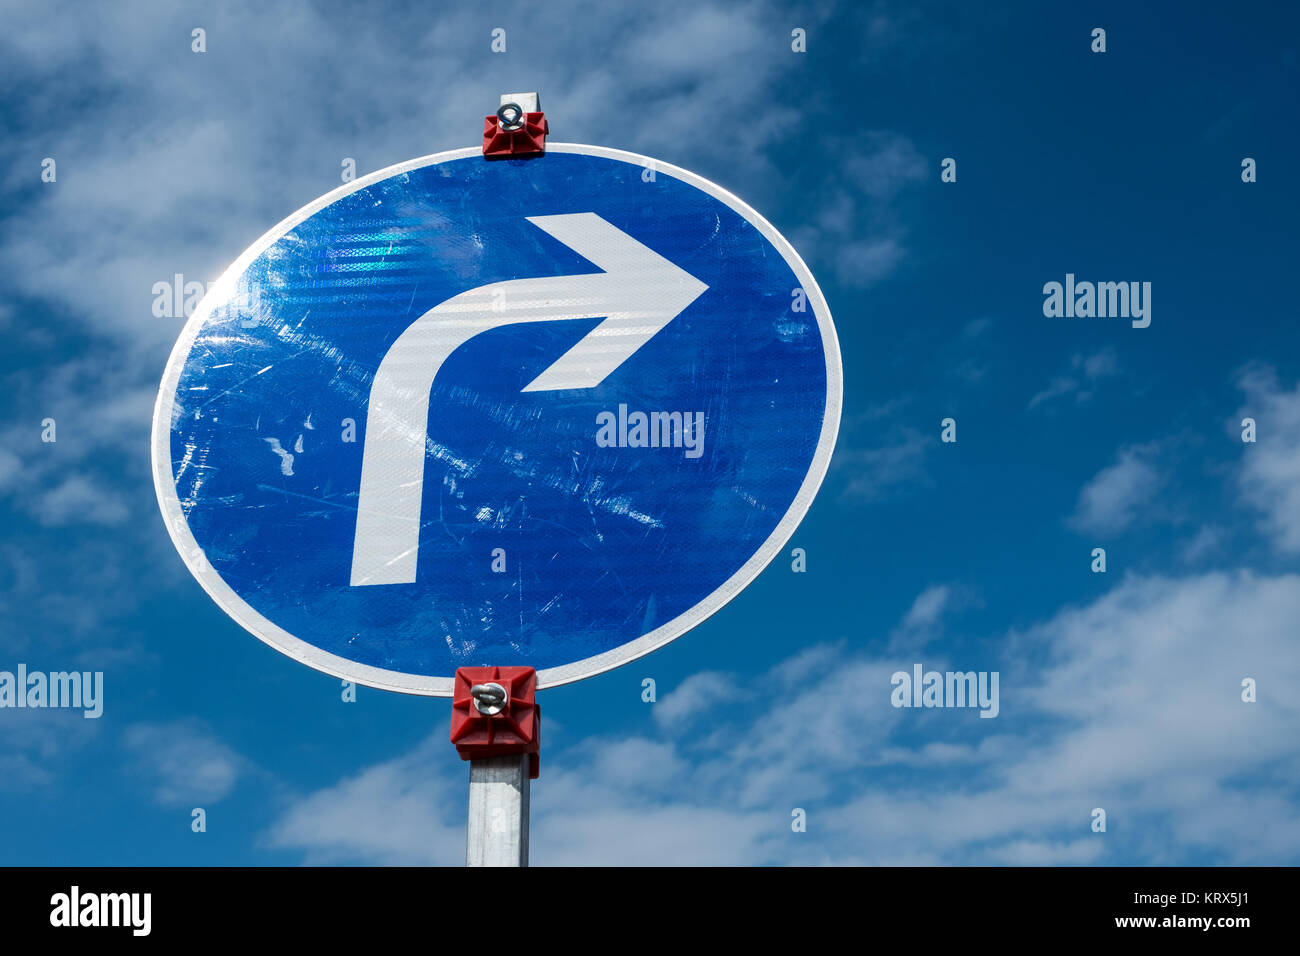 traffic sign with right turn arrow Stock Photo